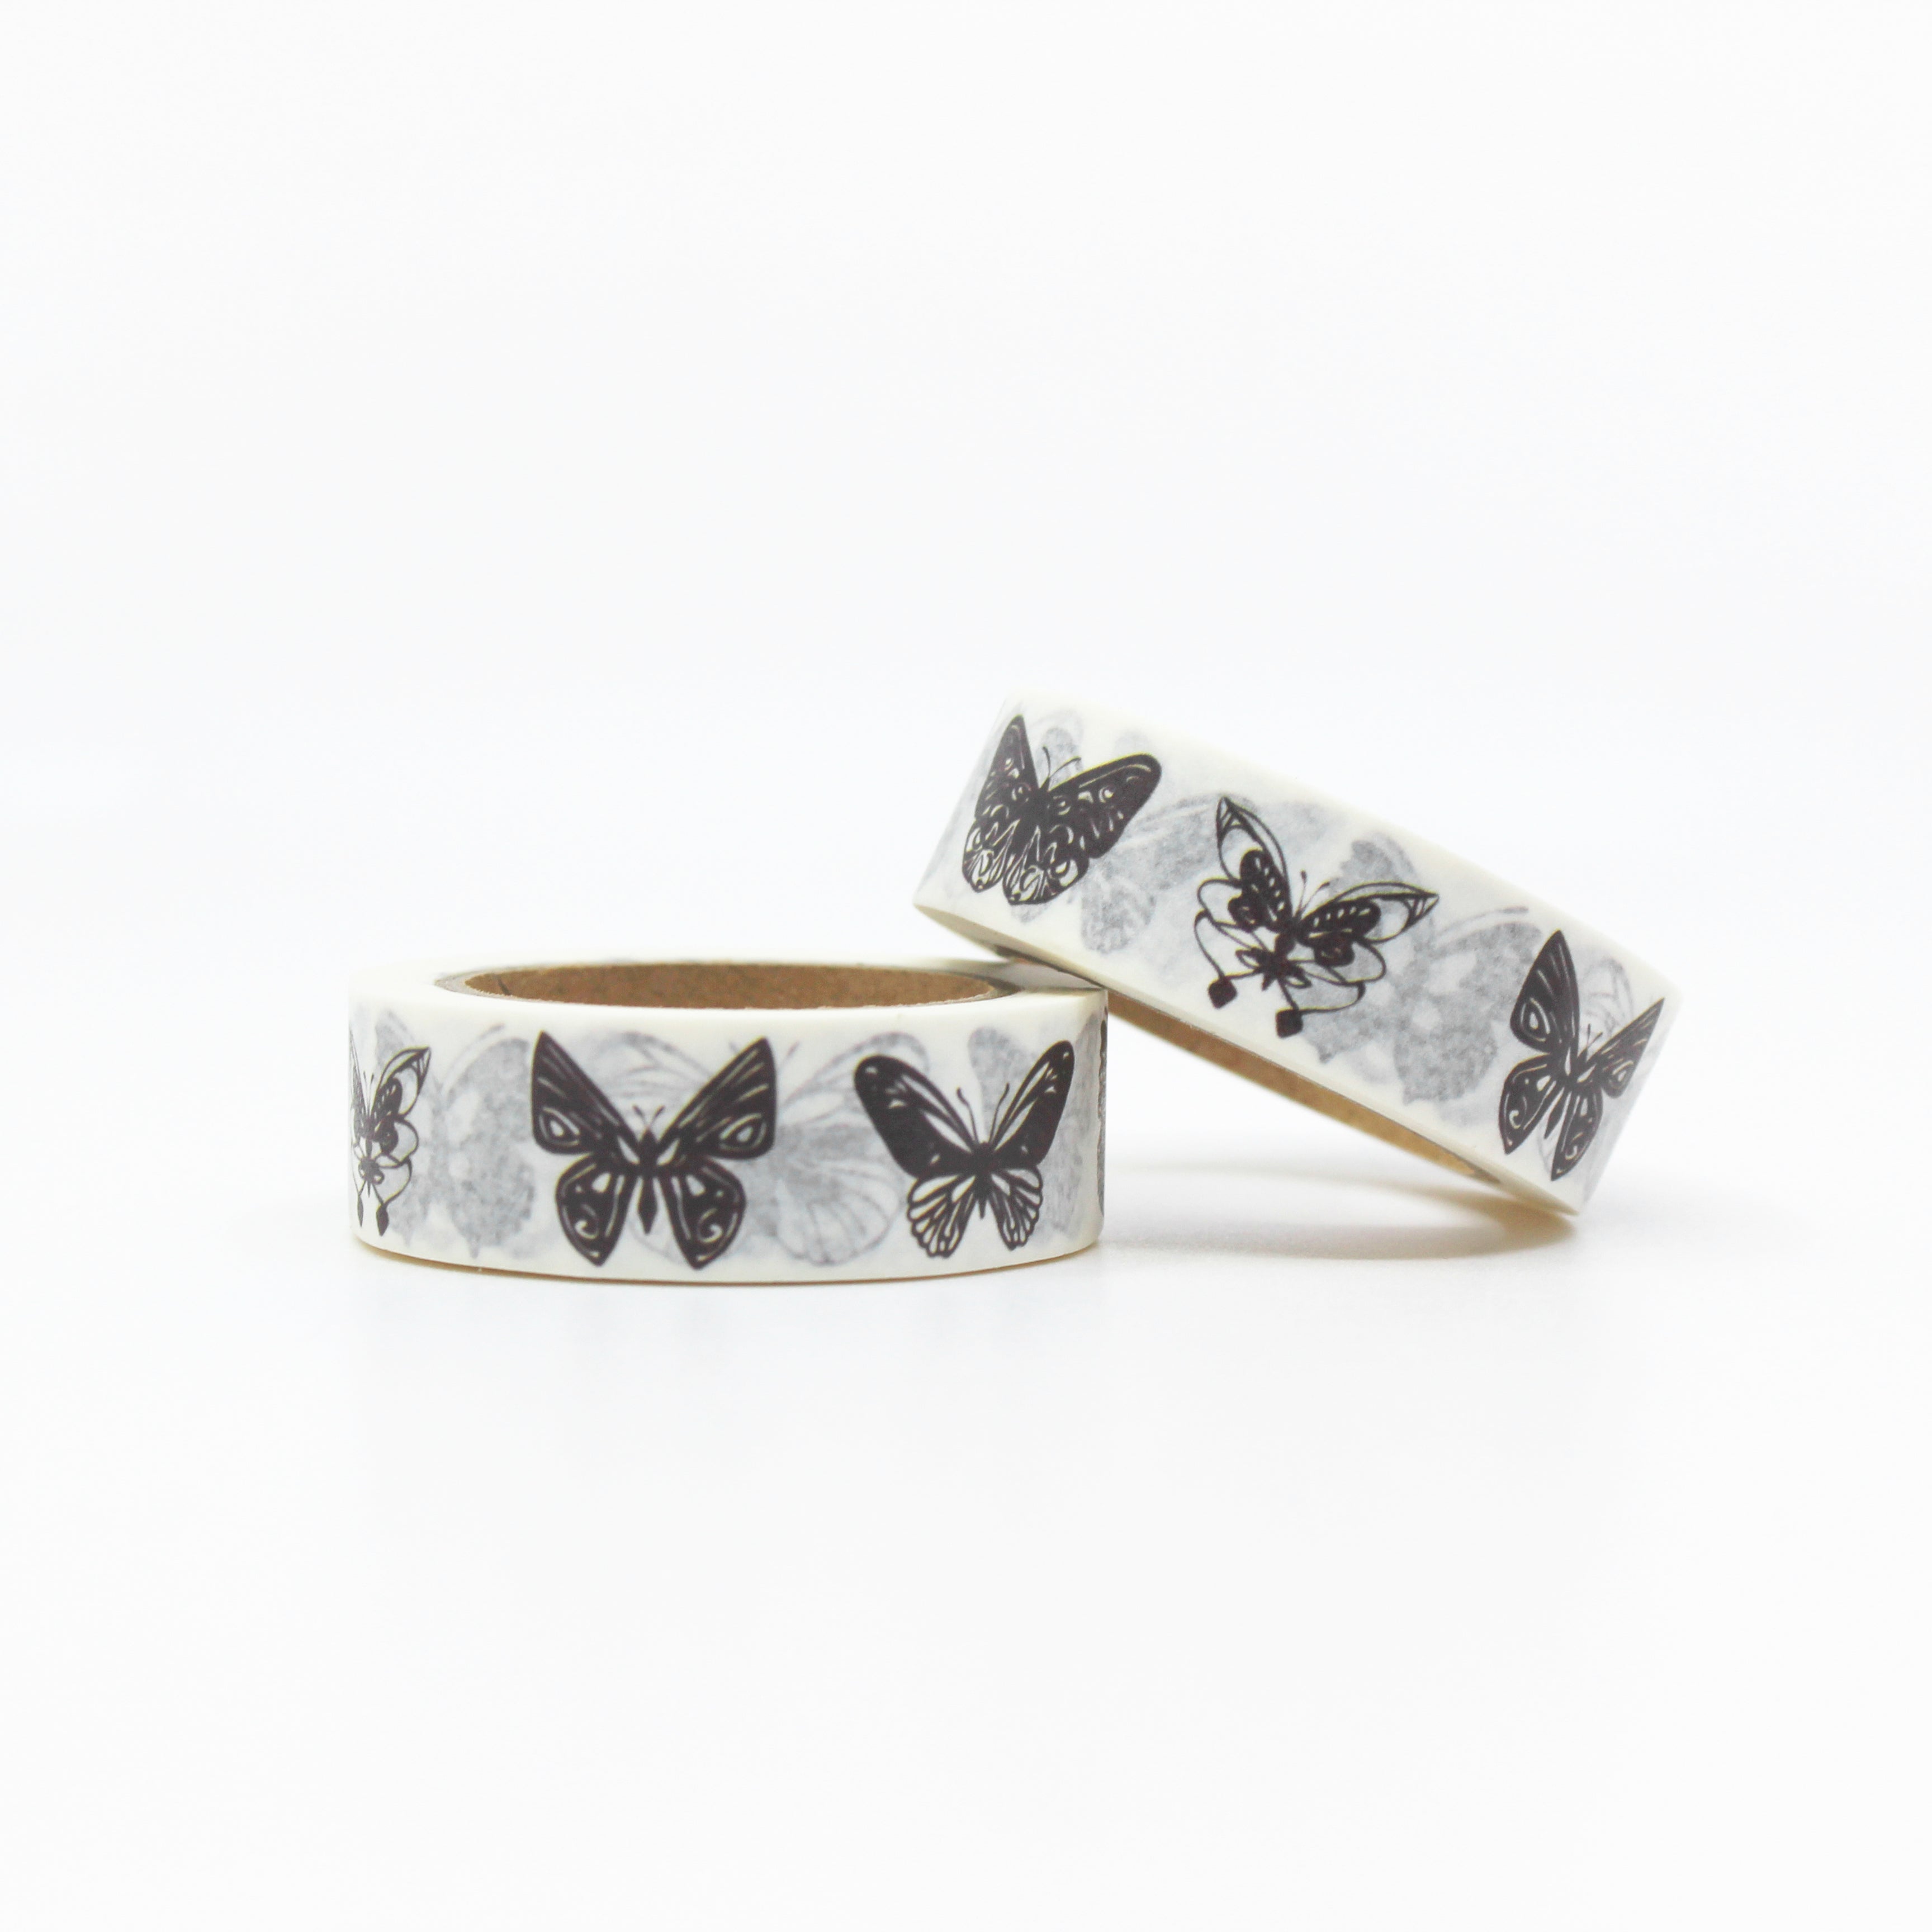 Enhance your crafts with our elegant black and white butterfly washi tape, featuring delicate and minimalist butterfly designs for a touch of simplicity and sophistication. This tape is sold at BBB Supplies Craft Shop.